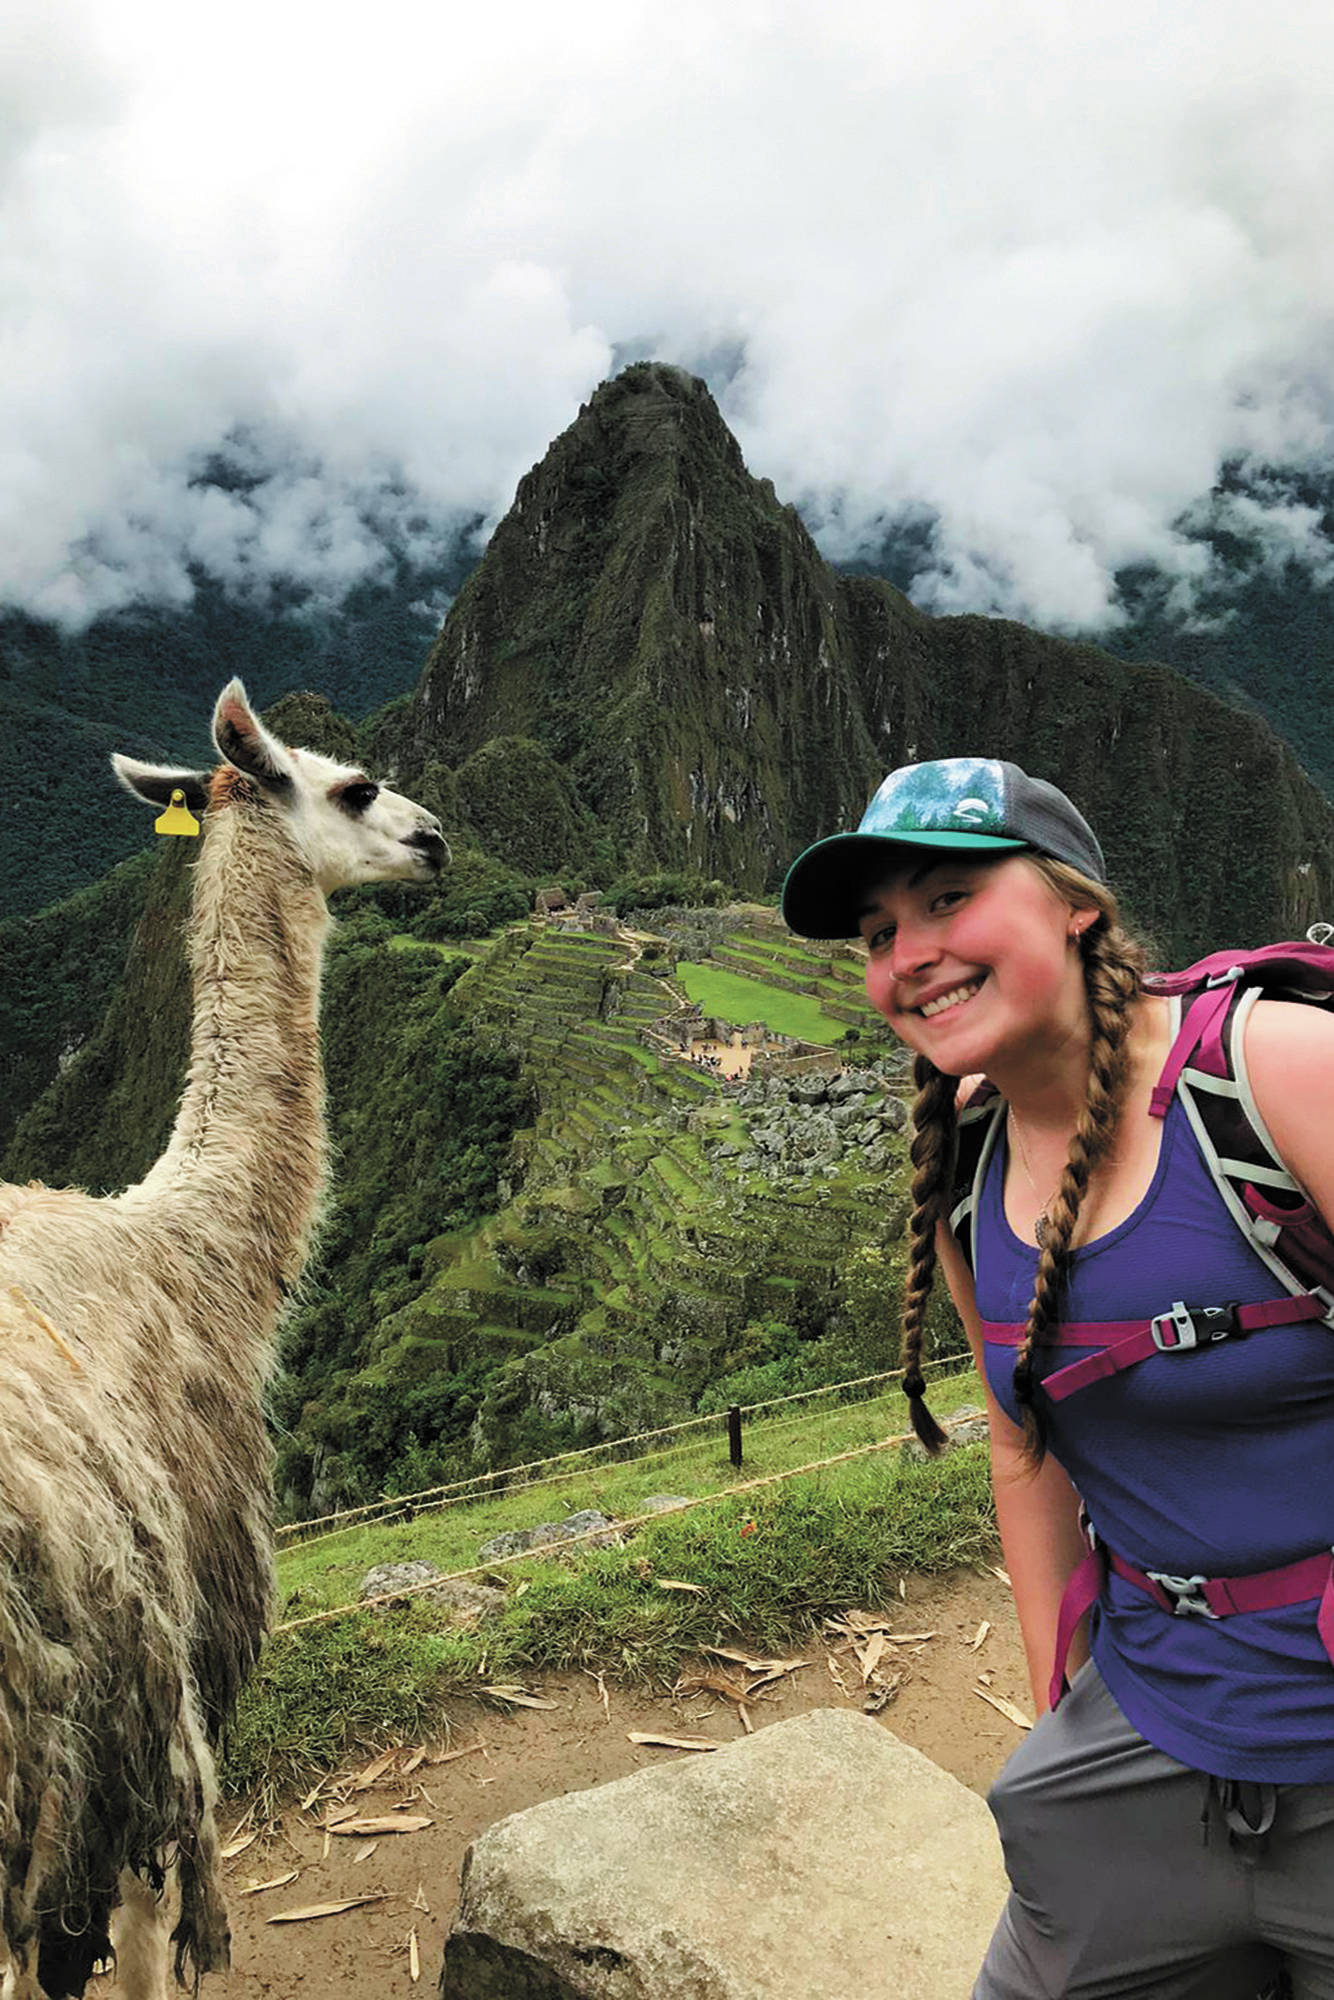 Brenna McCarron, a Homer High School graduate stuck in Peru after the country closed its borders to stem the spread of the novel coronavirus, enjoys the sights at Machu Picchu, Peru. She is one of about 19 Alaskans stranded in the country. (Photo courtesy Brenna McCarron)